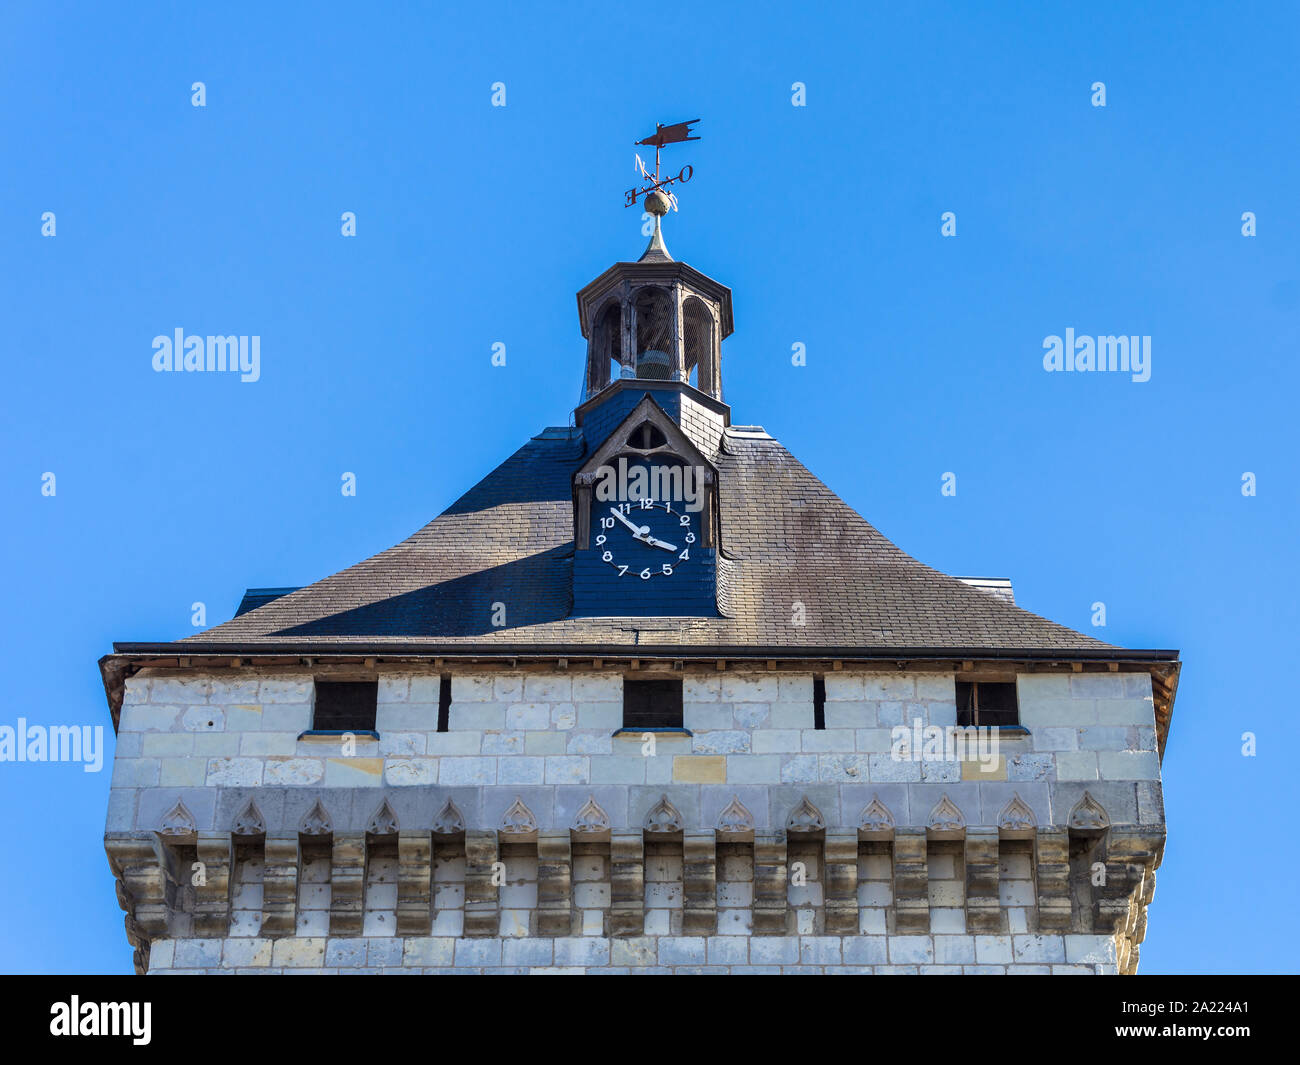 Clock above Porte Picoys defensive tower, Loches, Indre-et-Loire, France. Stock Photo